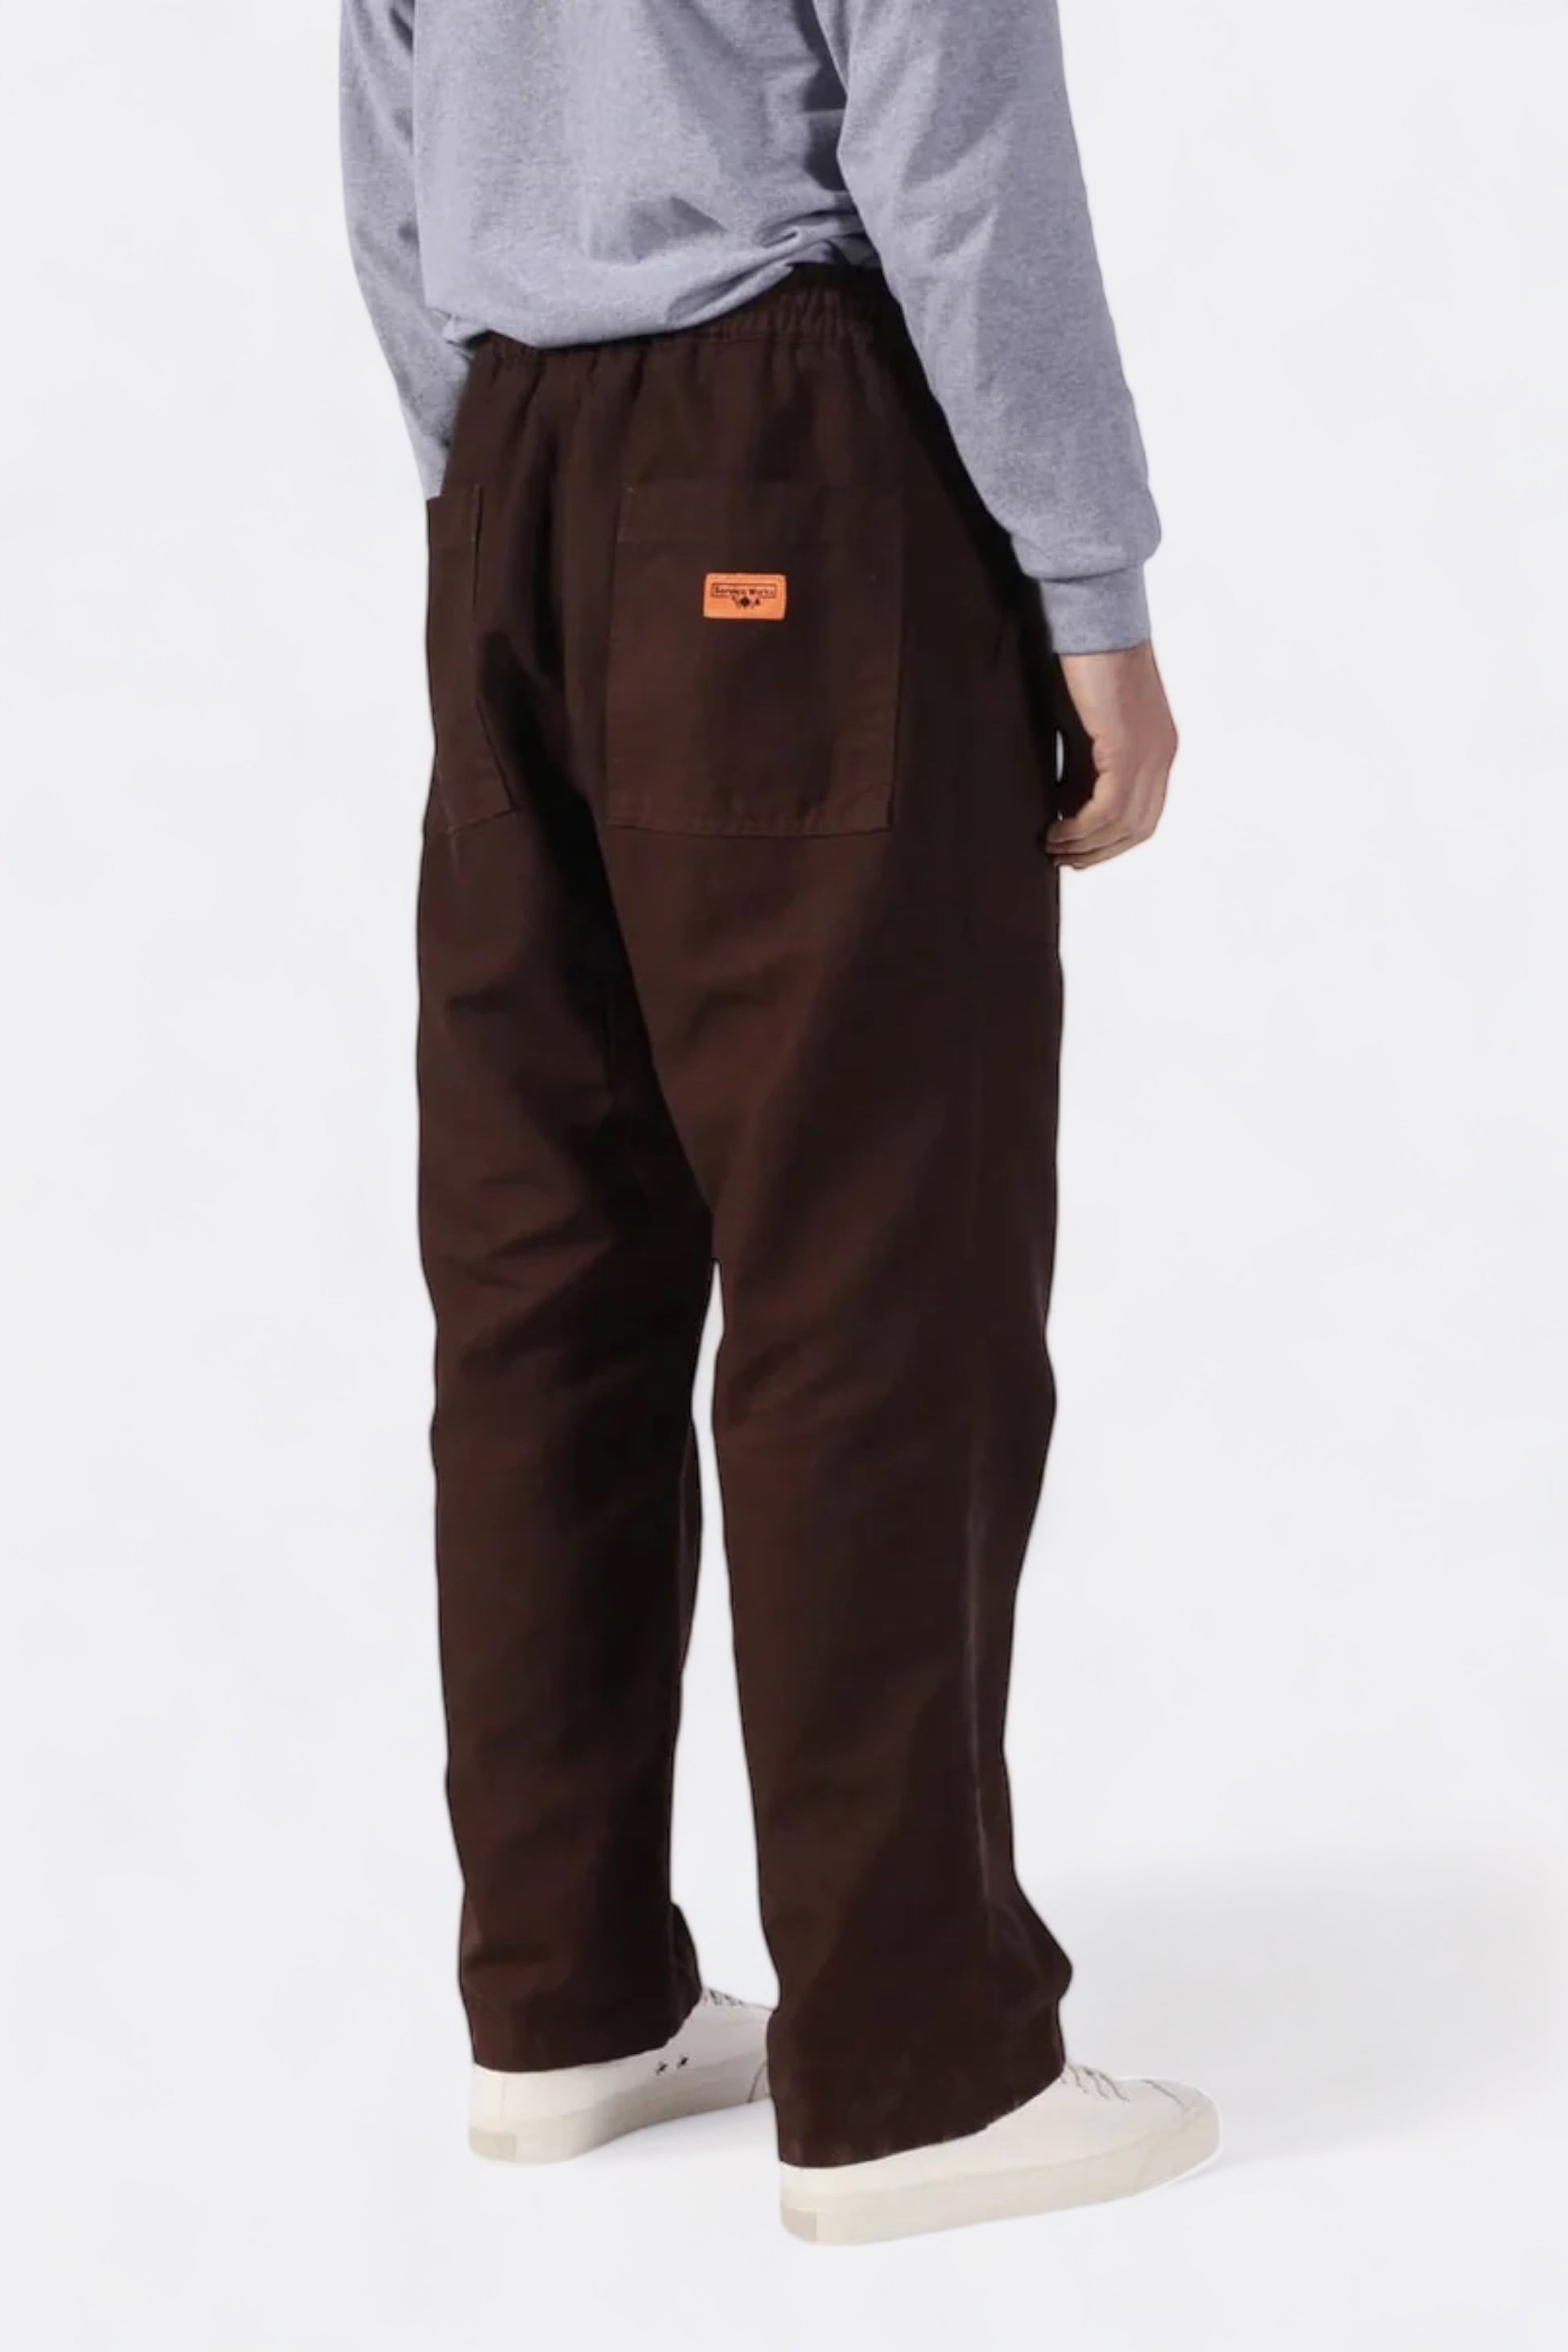 Service Works - Classic Chef Pants (Work Blue)